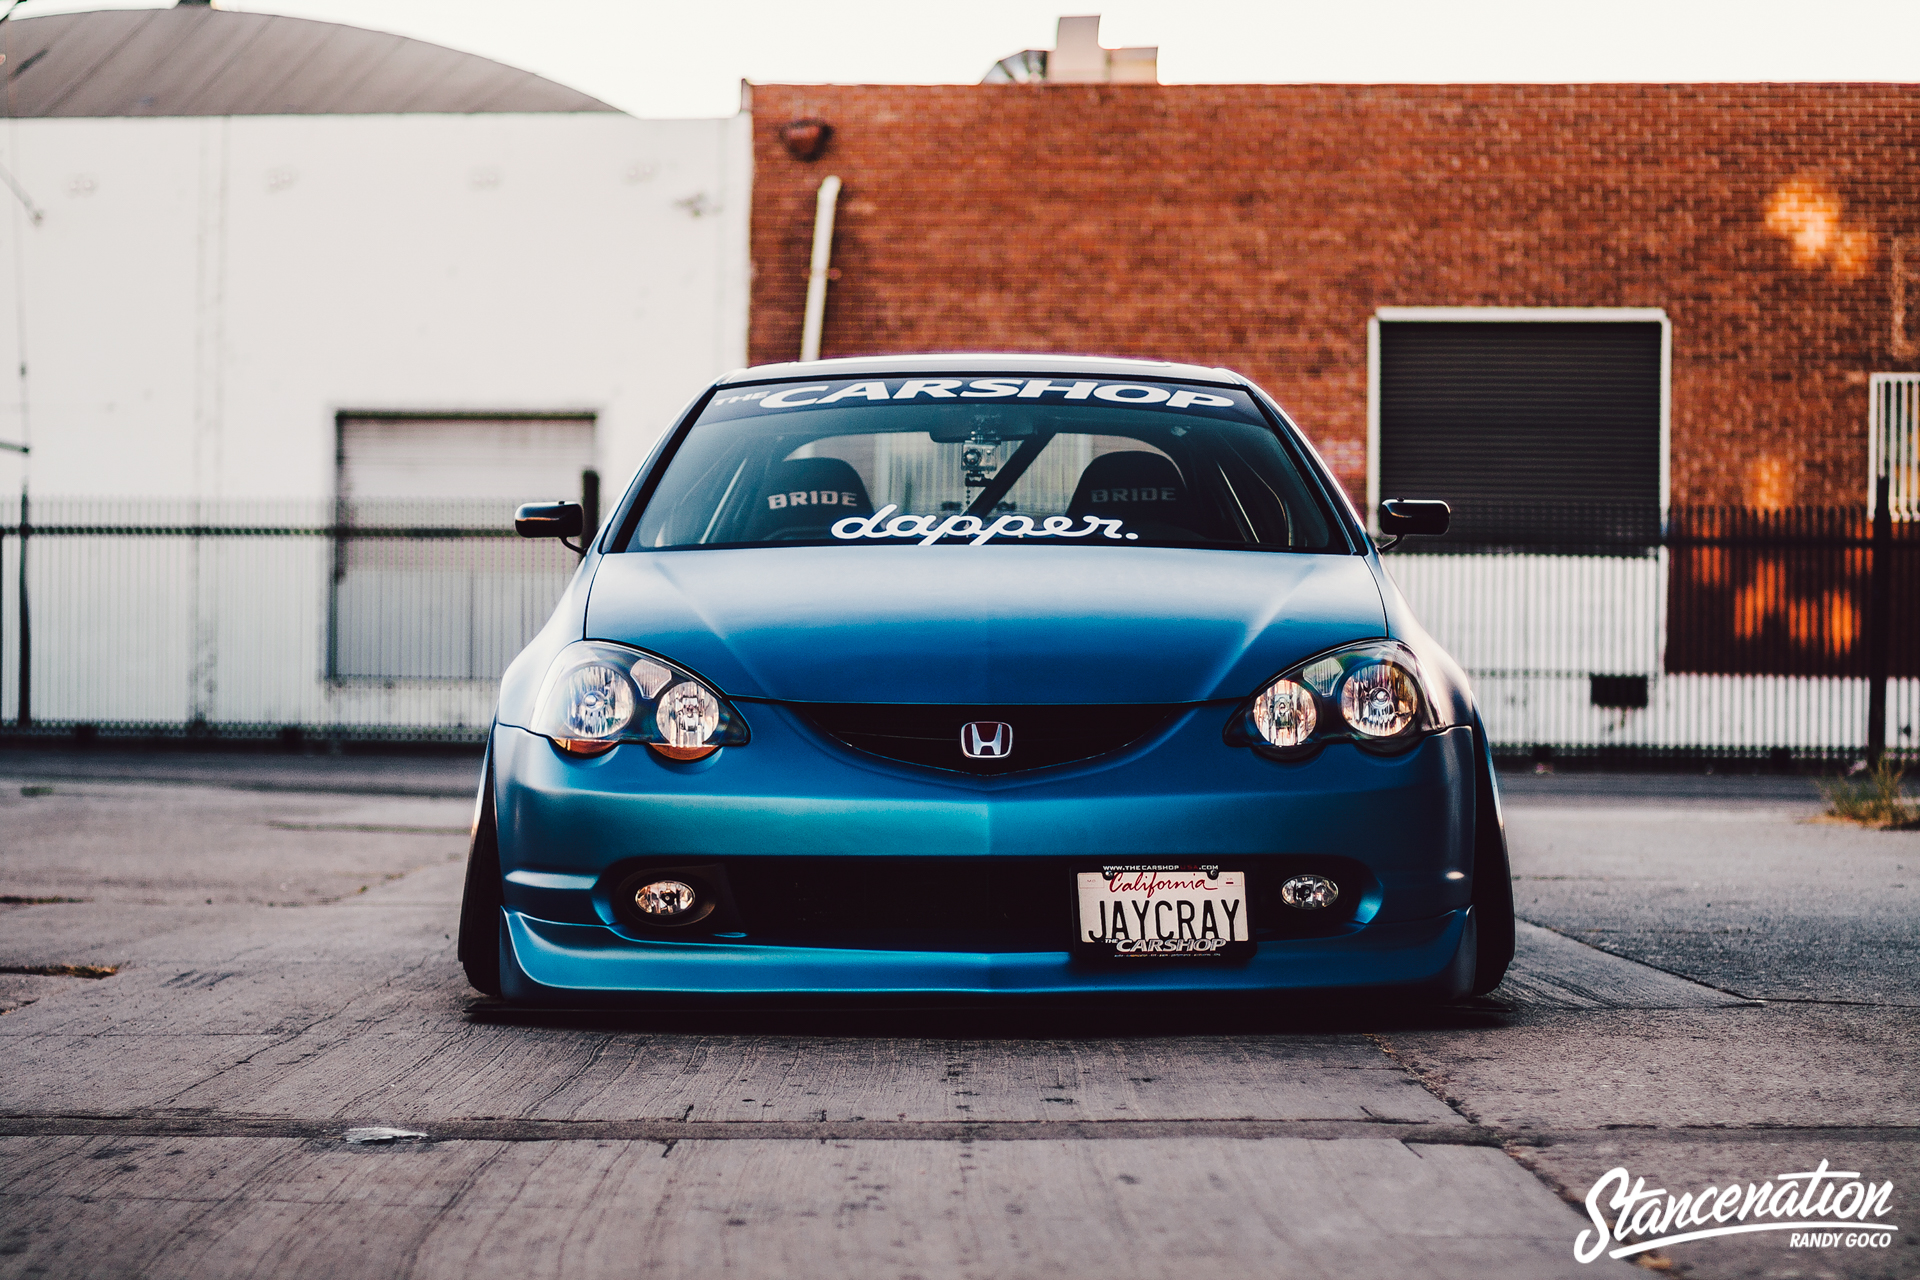 Gallery of Acura Rsx Type S Build.